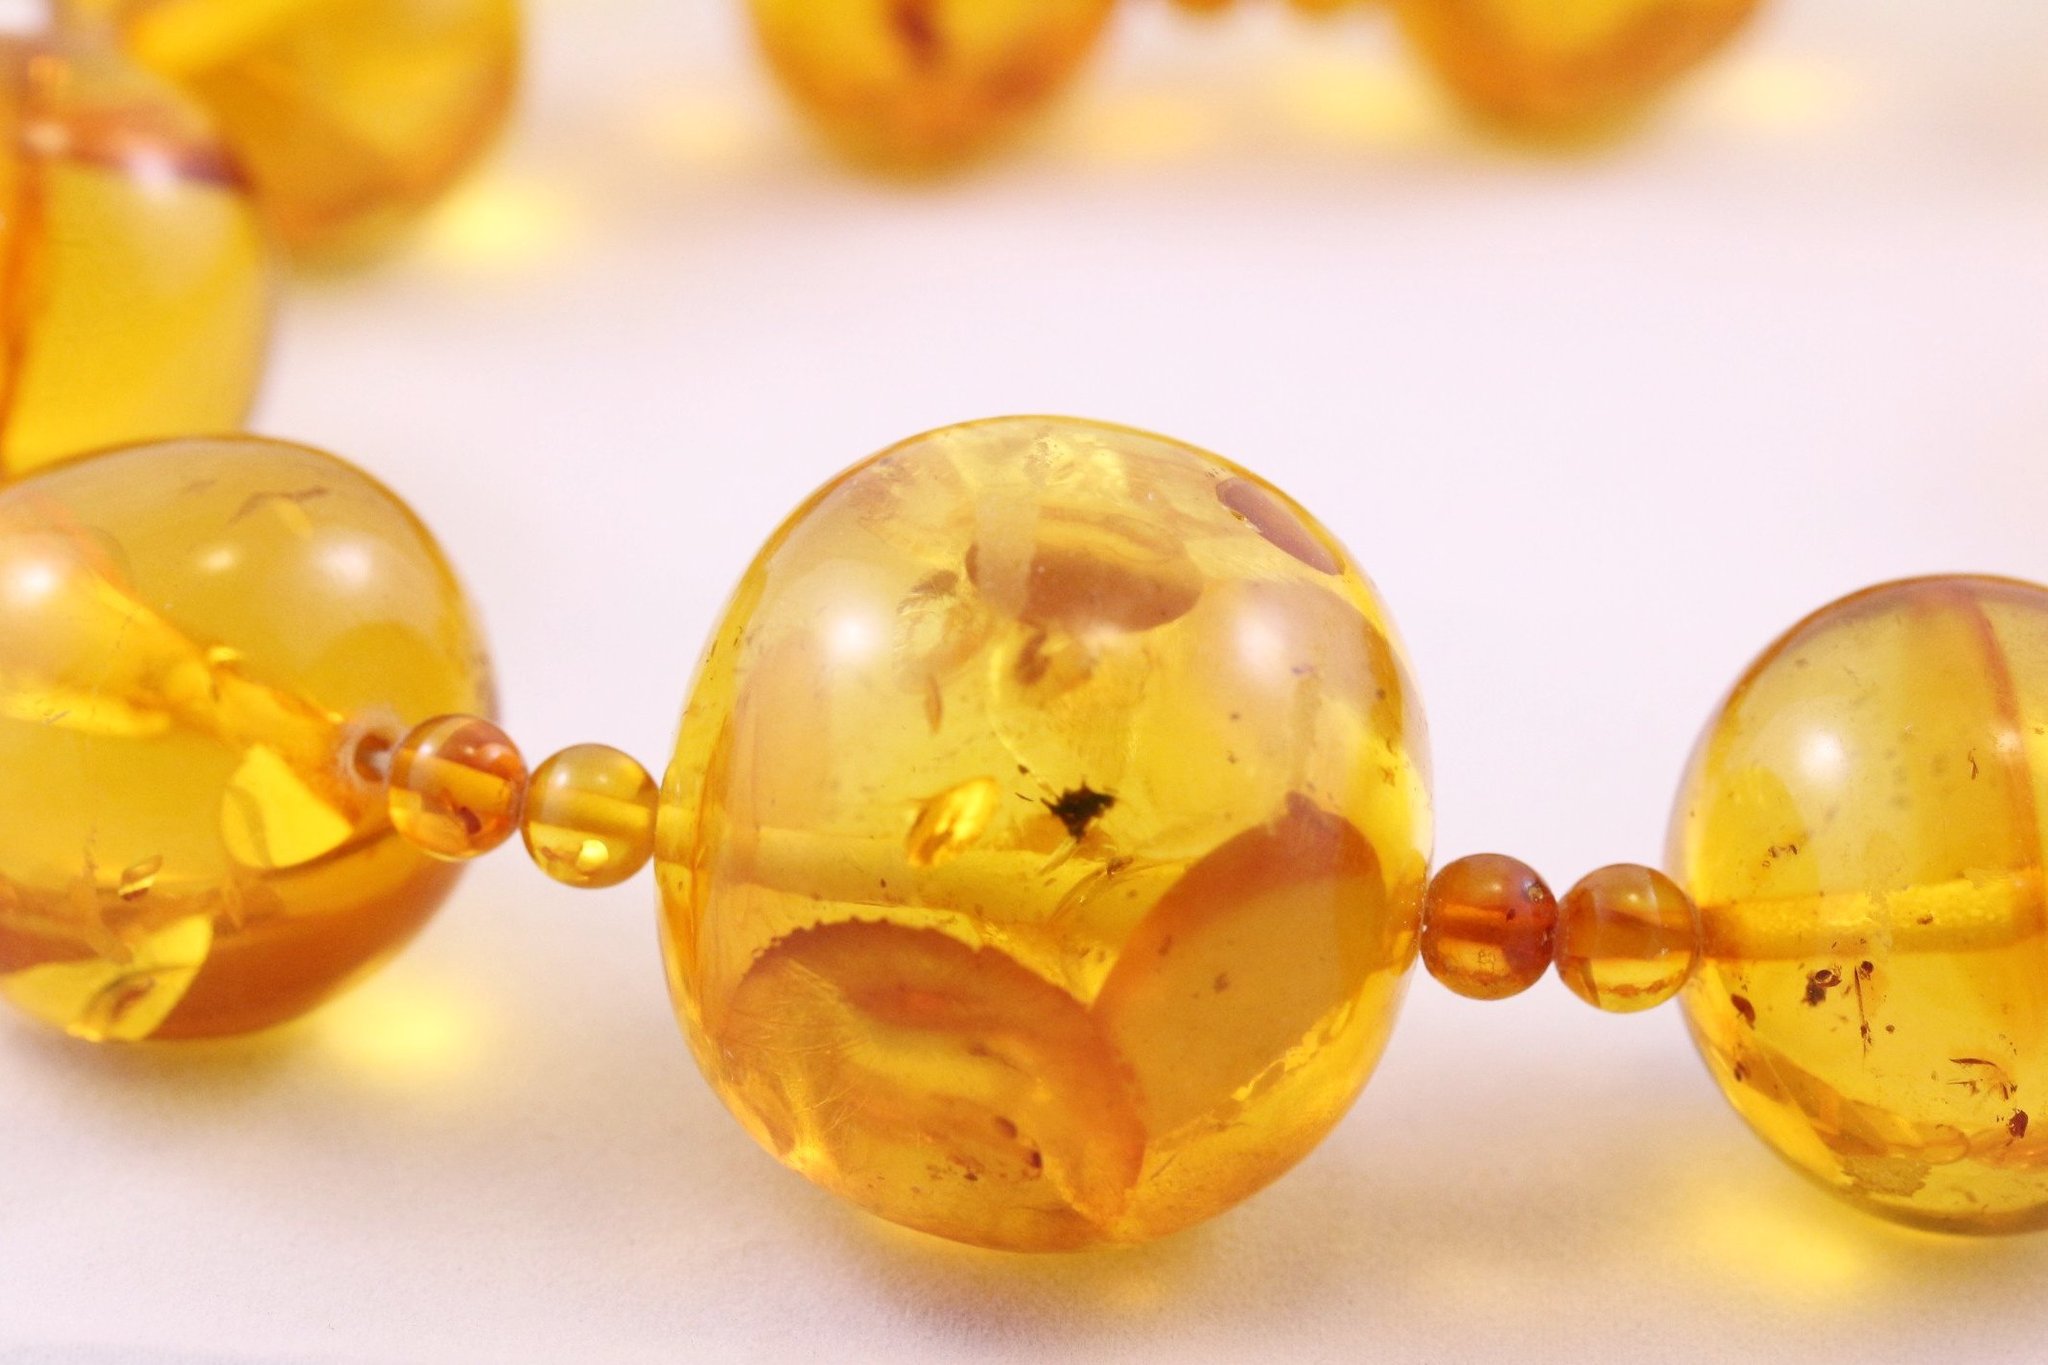 What to Know About Baltic Amber Necklaces for Your Baby — Doulas of Austin  - Birth Postpartum - Classes